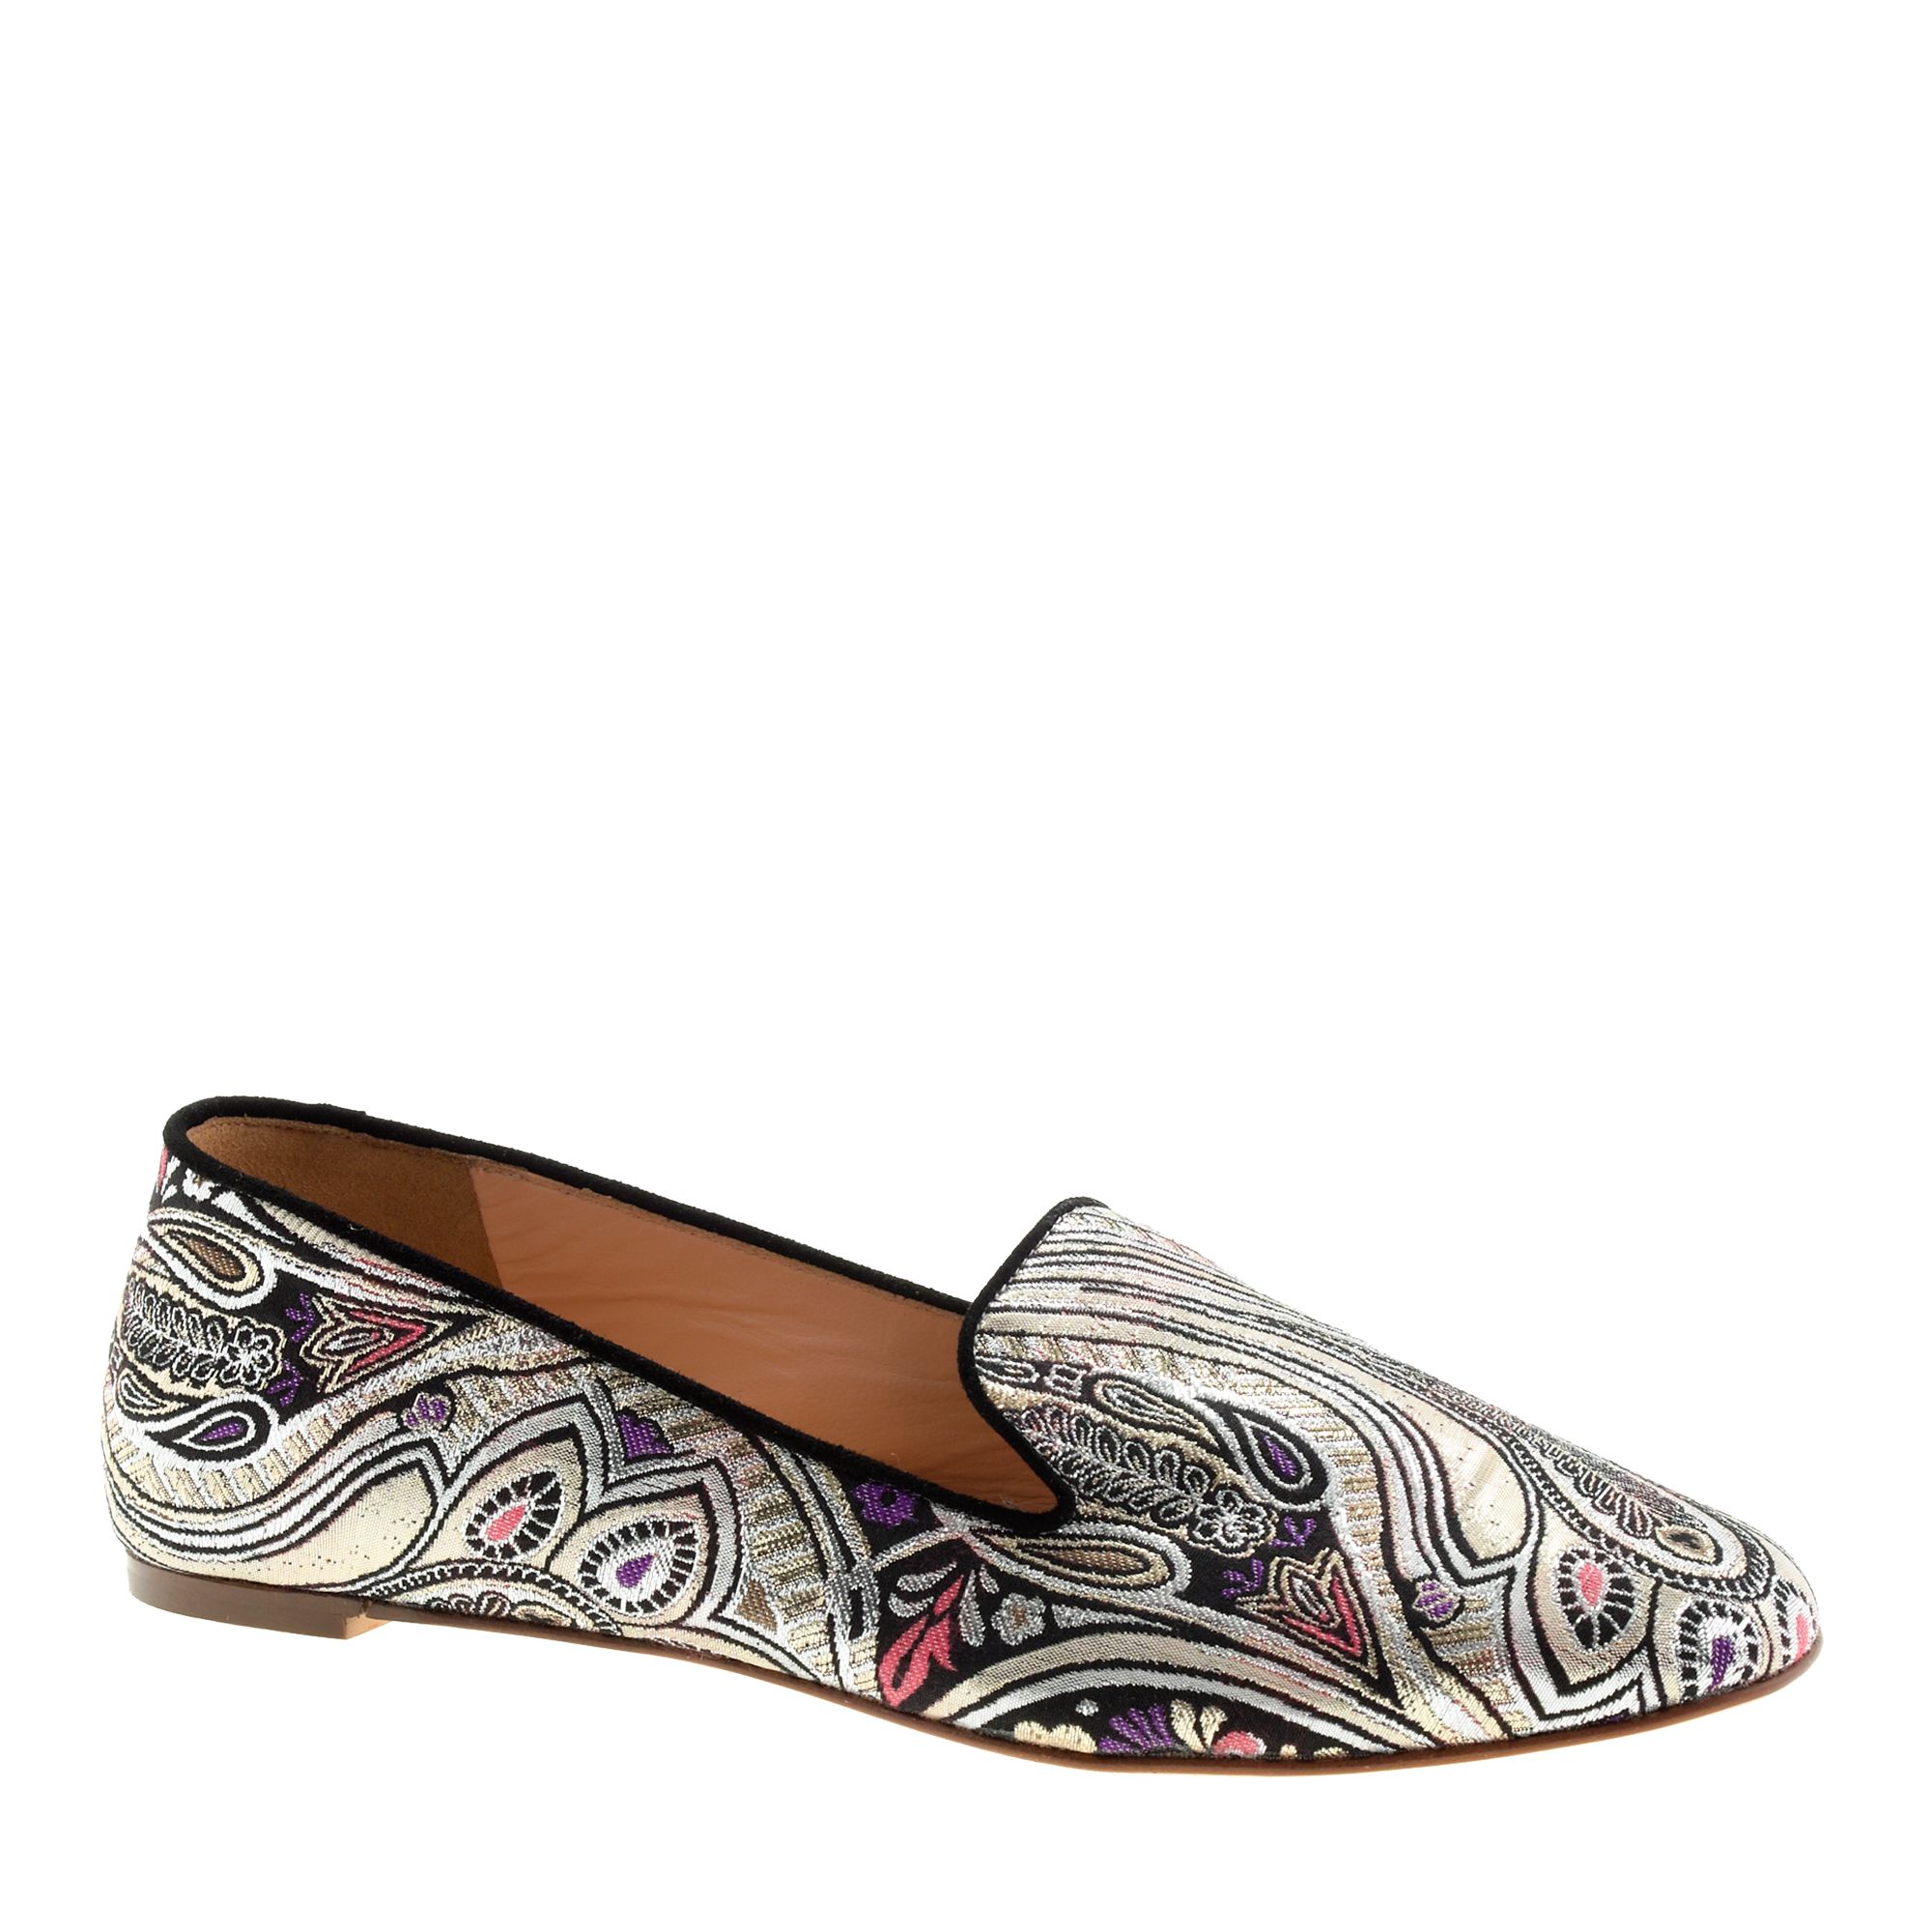 Lyst - J.Crew Darby Paisley Loafers in Black